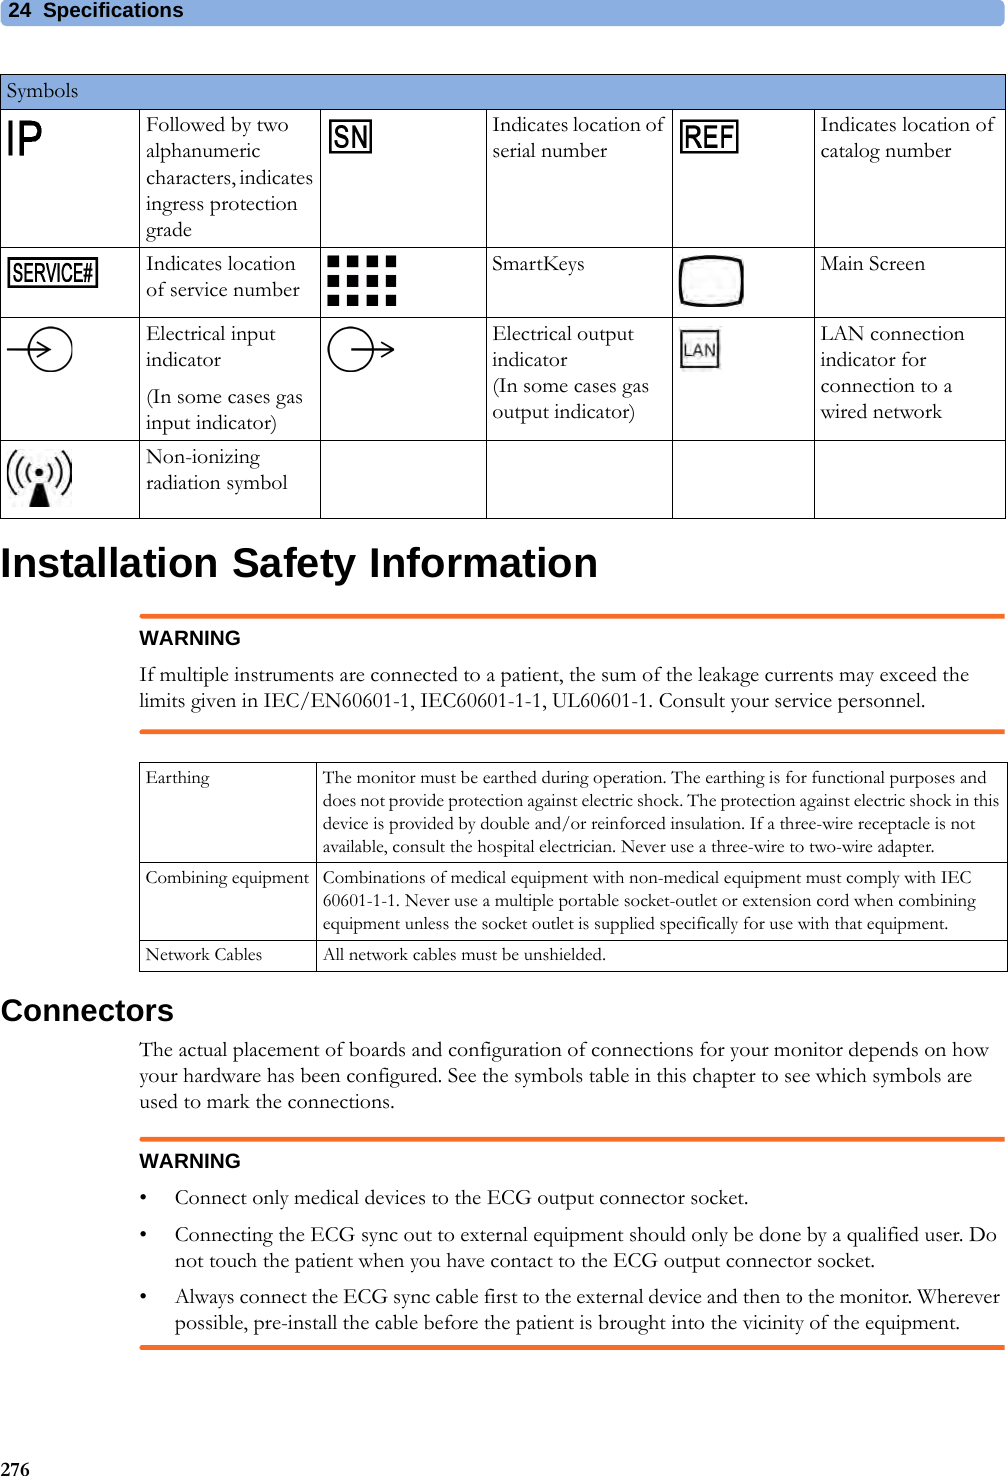 24 Specifications276Installation Safety InformationWARNINGIf multiple instruments are connected to a patient, the sum of the leakage currents may exceed the limits given in IEC/EN60601-1, IEC60601-1-1, UL60601-1. Consult your service personnel.ConnectorsThe actual placement of boards and configuration of connections for your monitor depends on how your hardware has been configured. See the symbols table in this chapter to see which symbols are used to mark the connections.WARNING• Connect only medical devices to the ECG output connector socket. • Connecting the ECG sync out to external equipment should only be done by a qualified user. Do not touch the patient when you have contact to the ECG output connector socket.• Always connect the ECG sync cable first to the external device and then to the monitor. Wherever possible, pre-install the cable before the patient is brought into the vicinity of the equipment.Followed by two alphanumeric characters, indicates ingress protection gradeIndicates location of serial numberIndicates location of catalog numberIndicates location of service numberSmartKeys Main ScreenElectrical input indicator(In some cases gas input indicator)Electrical output indicator(In some cases gas output indicator)LAN connection indicator for connection to a wired networkNon-ionizing radiation symbolSymbolsEarthing The monitor must be earthed during operation. The earthing is for functional purposes and does not provide protection against electric shock. The protection against electric shock in this device is provided by double and/or reinforced insulation. If a three-wire receptacle is not available, consult the hospital electrician. Never use a three-wire to two-wire adapter.Combining equipment Combinations of medical equipment with non-medical equipment must comply with IEC 60601-1-1. Never use a multiple portable socket-outlet or extension cord when combining equipment unless the socket outlet is supplied specifically for use with that equipment.Network Cables All network cables must be unshielded.